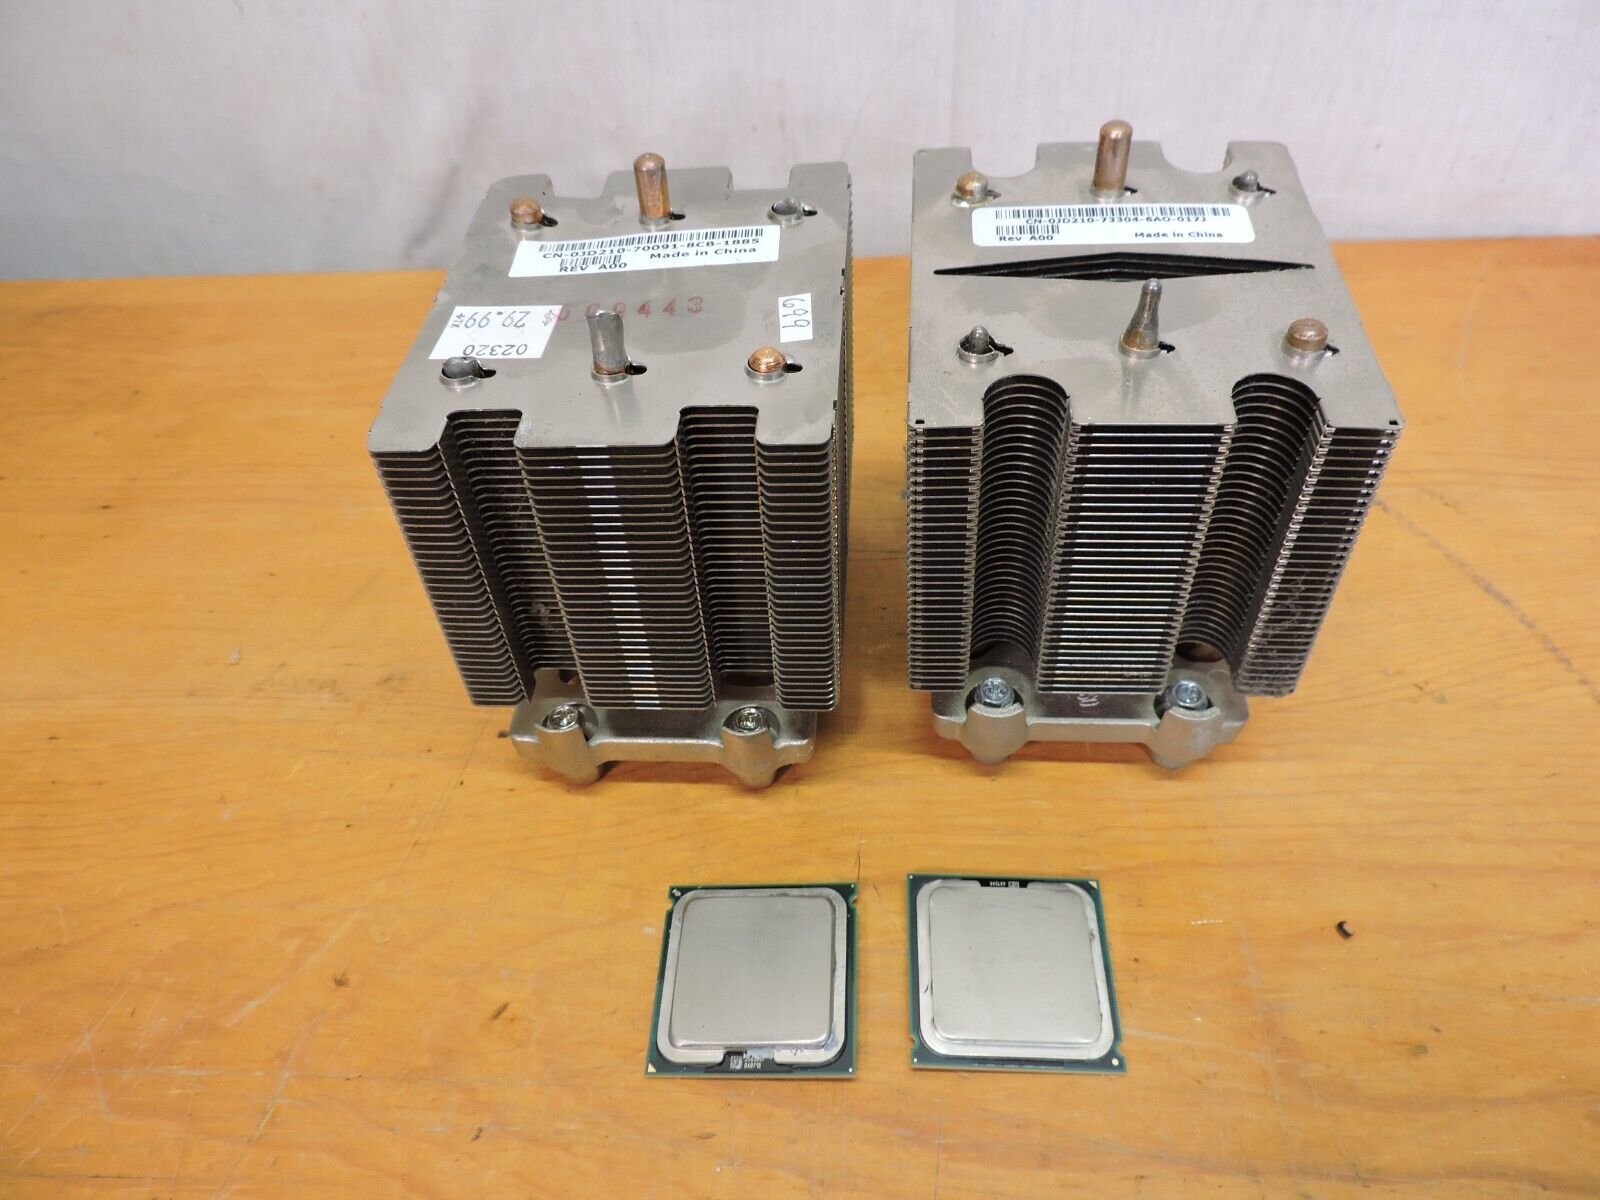 Pair of Intel 2GHz/4M/1333 Intel Xeon Processors and Heat sinks. Tested  Working